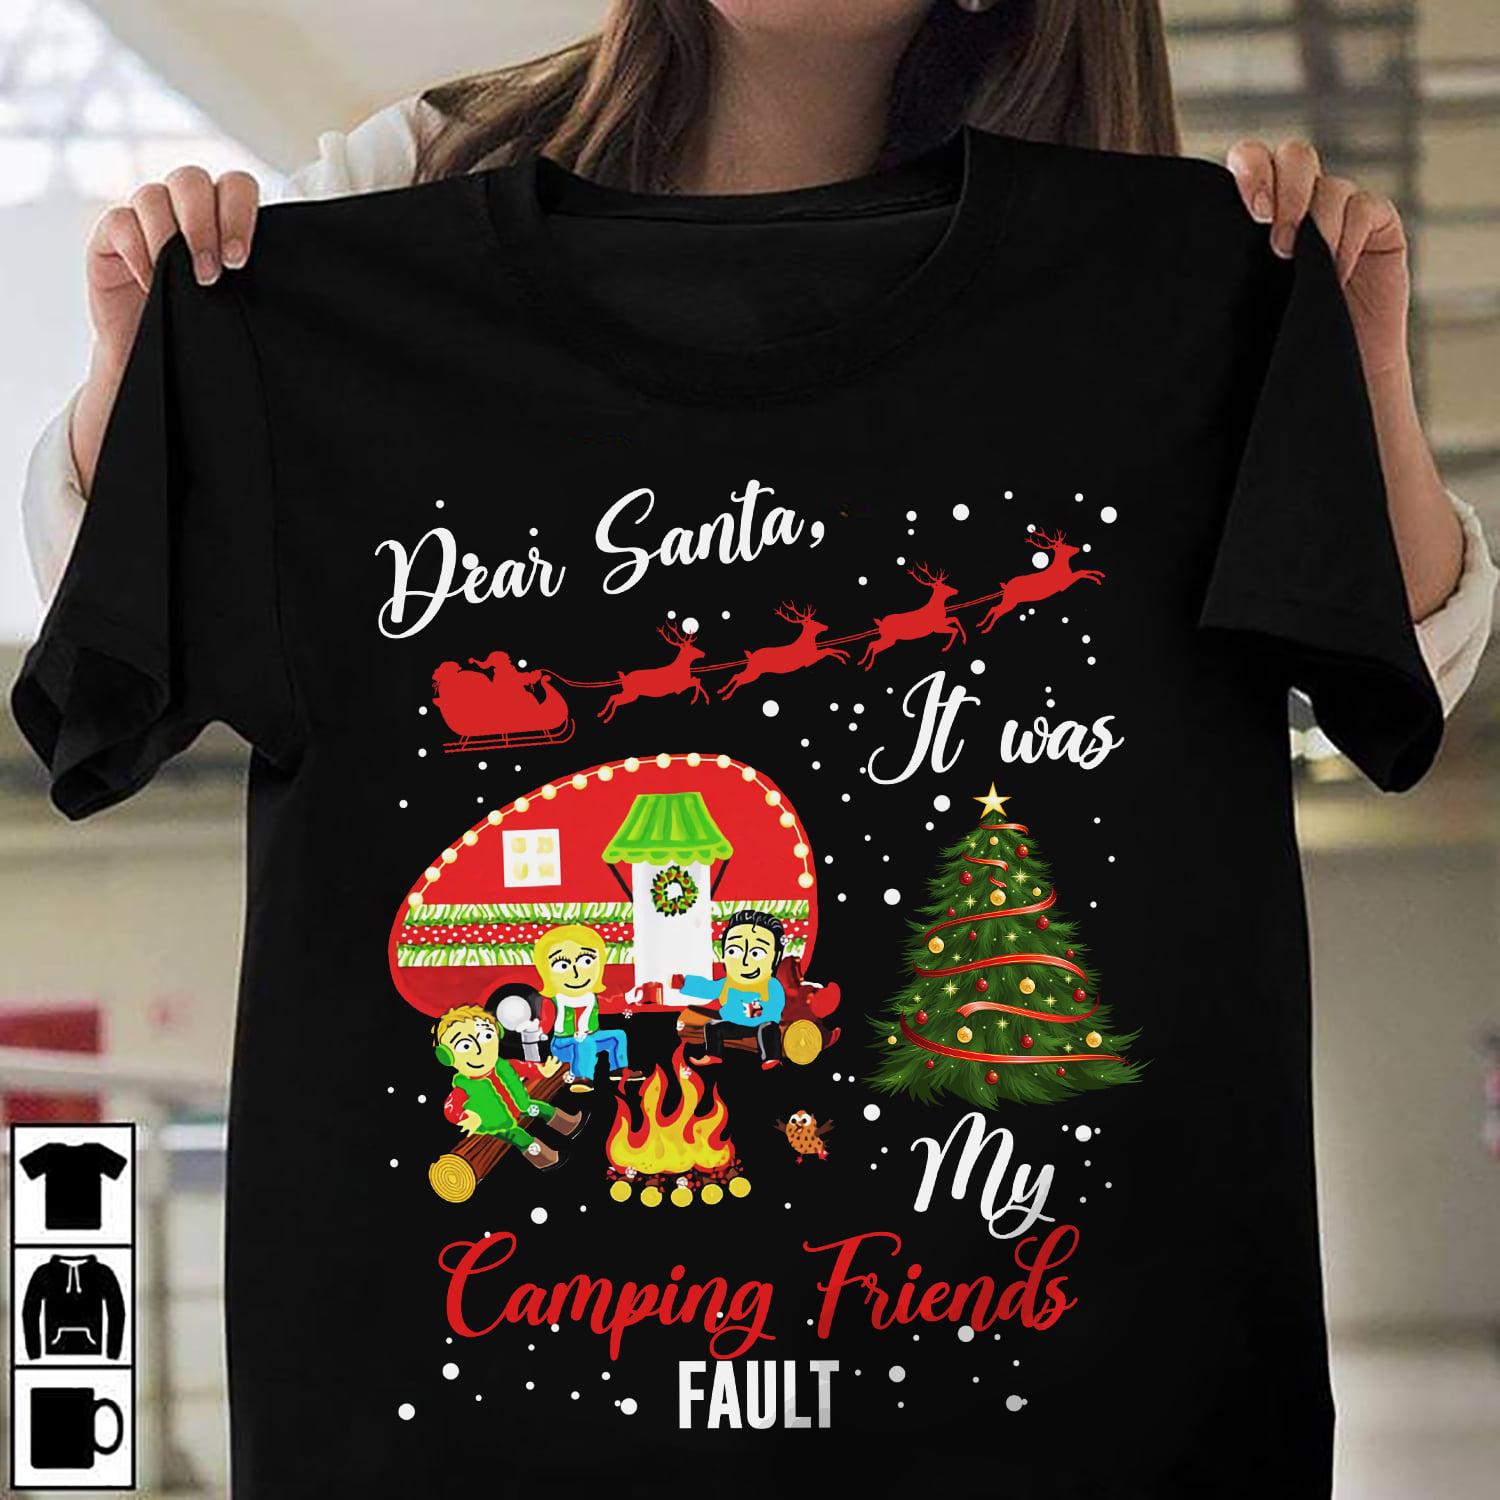 Camping Friends Christmas Night - Dear santa it was my camping friends fault